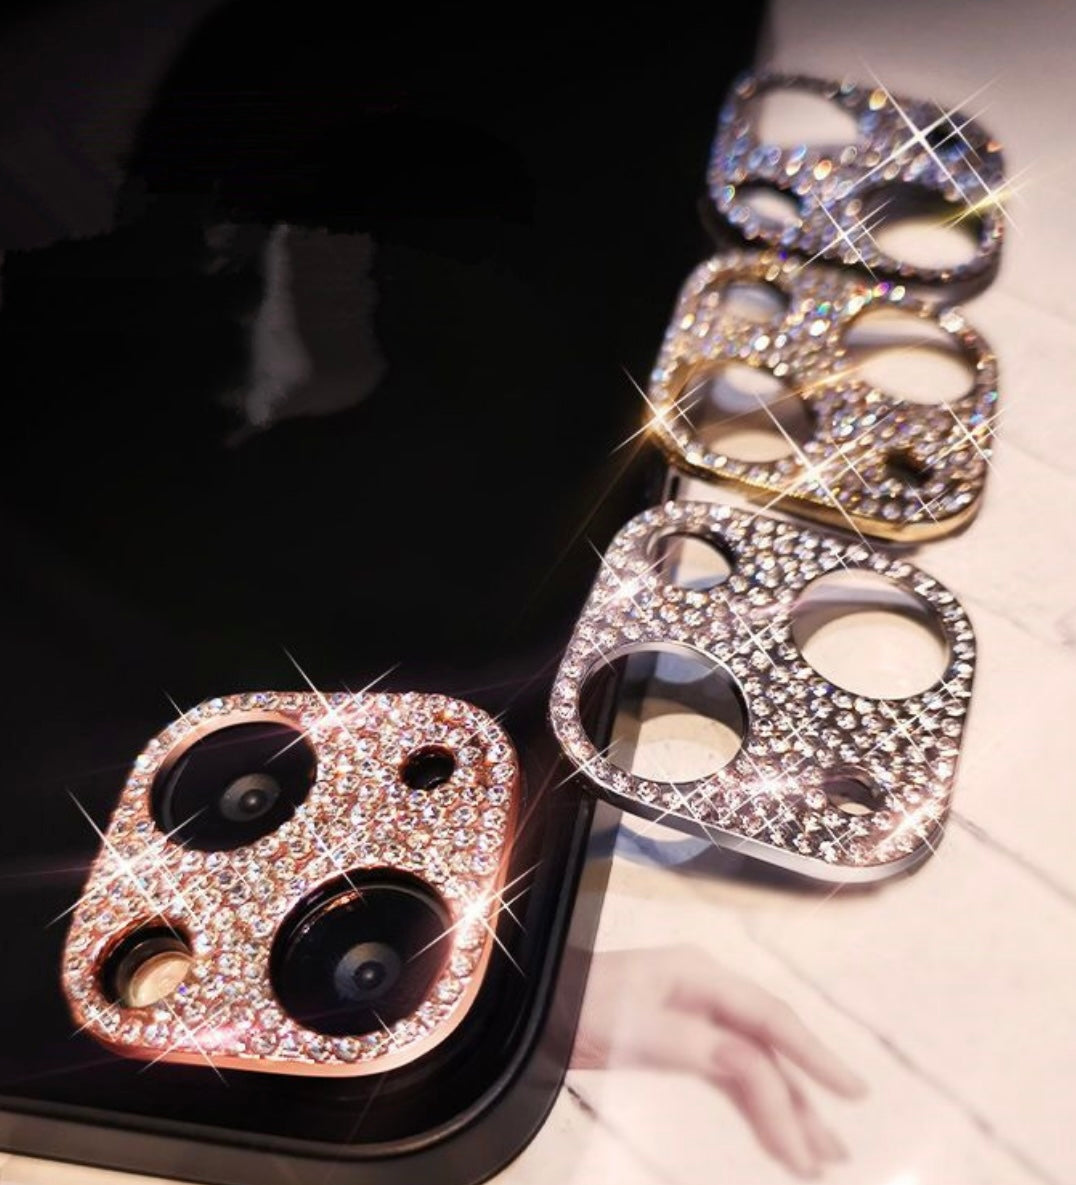 Blingy iPhone camera protector